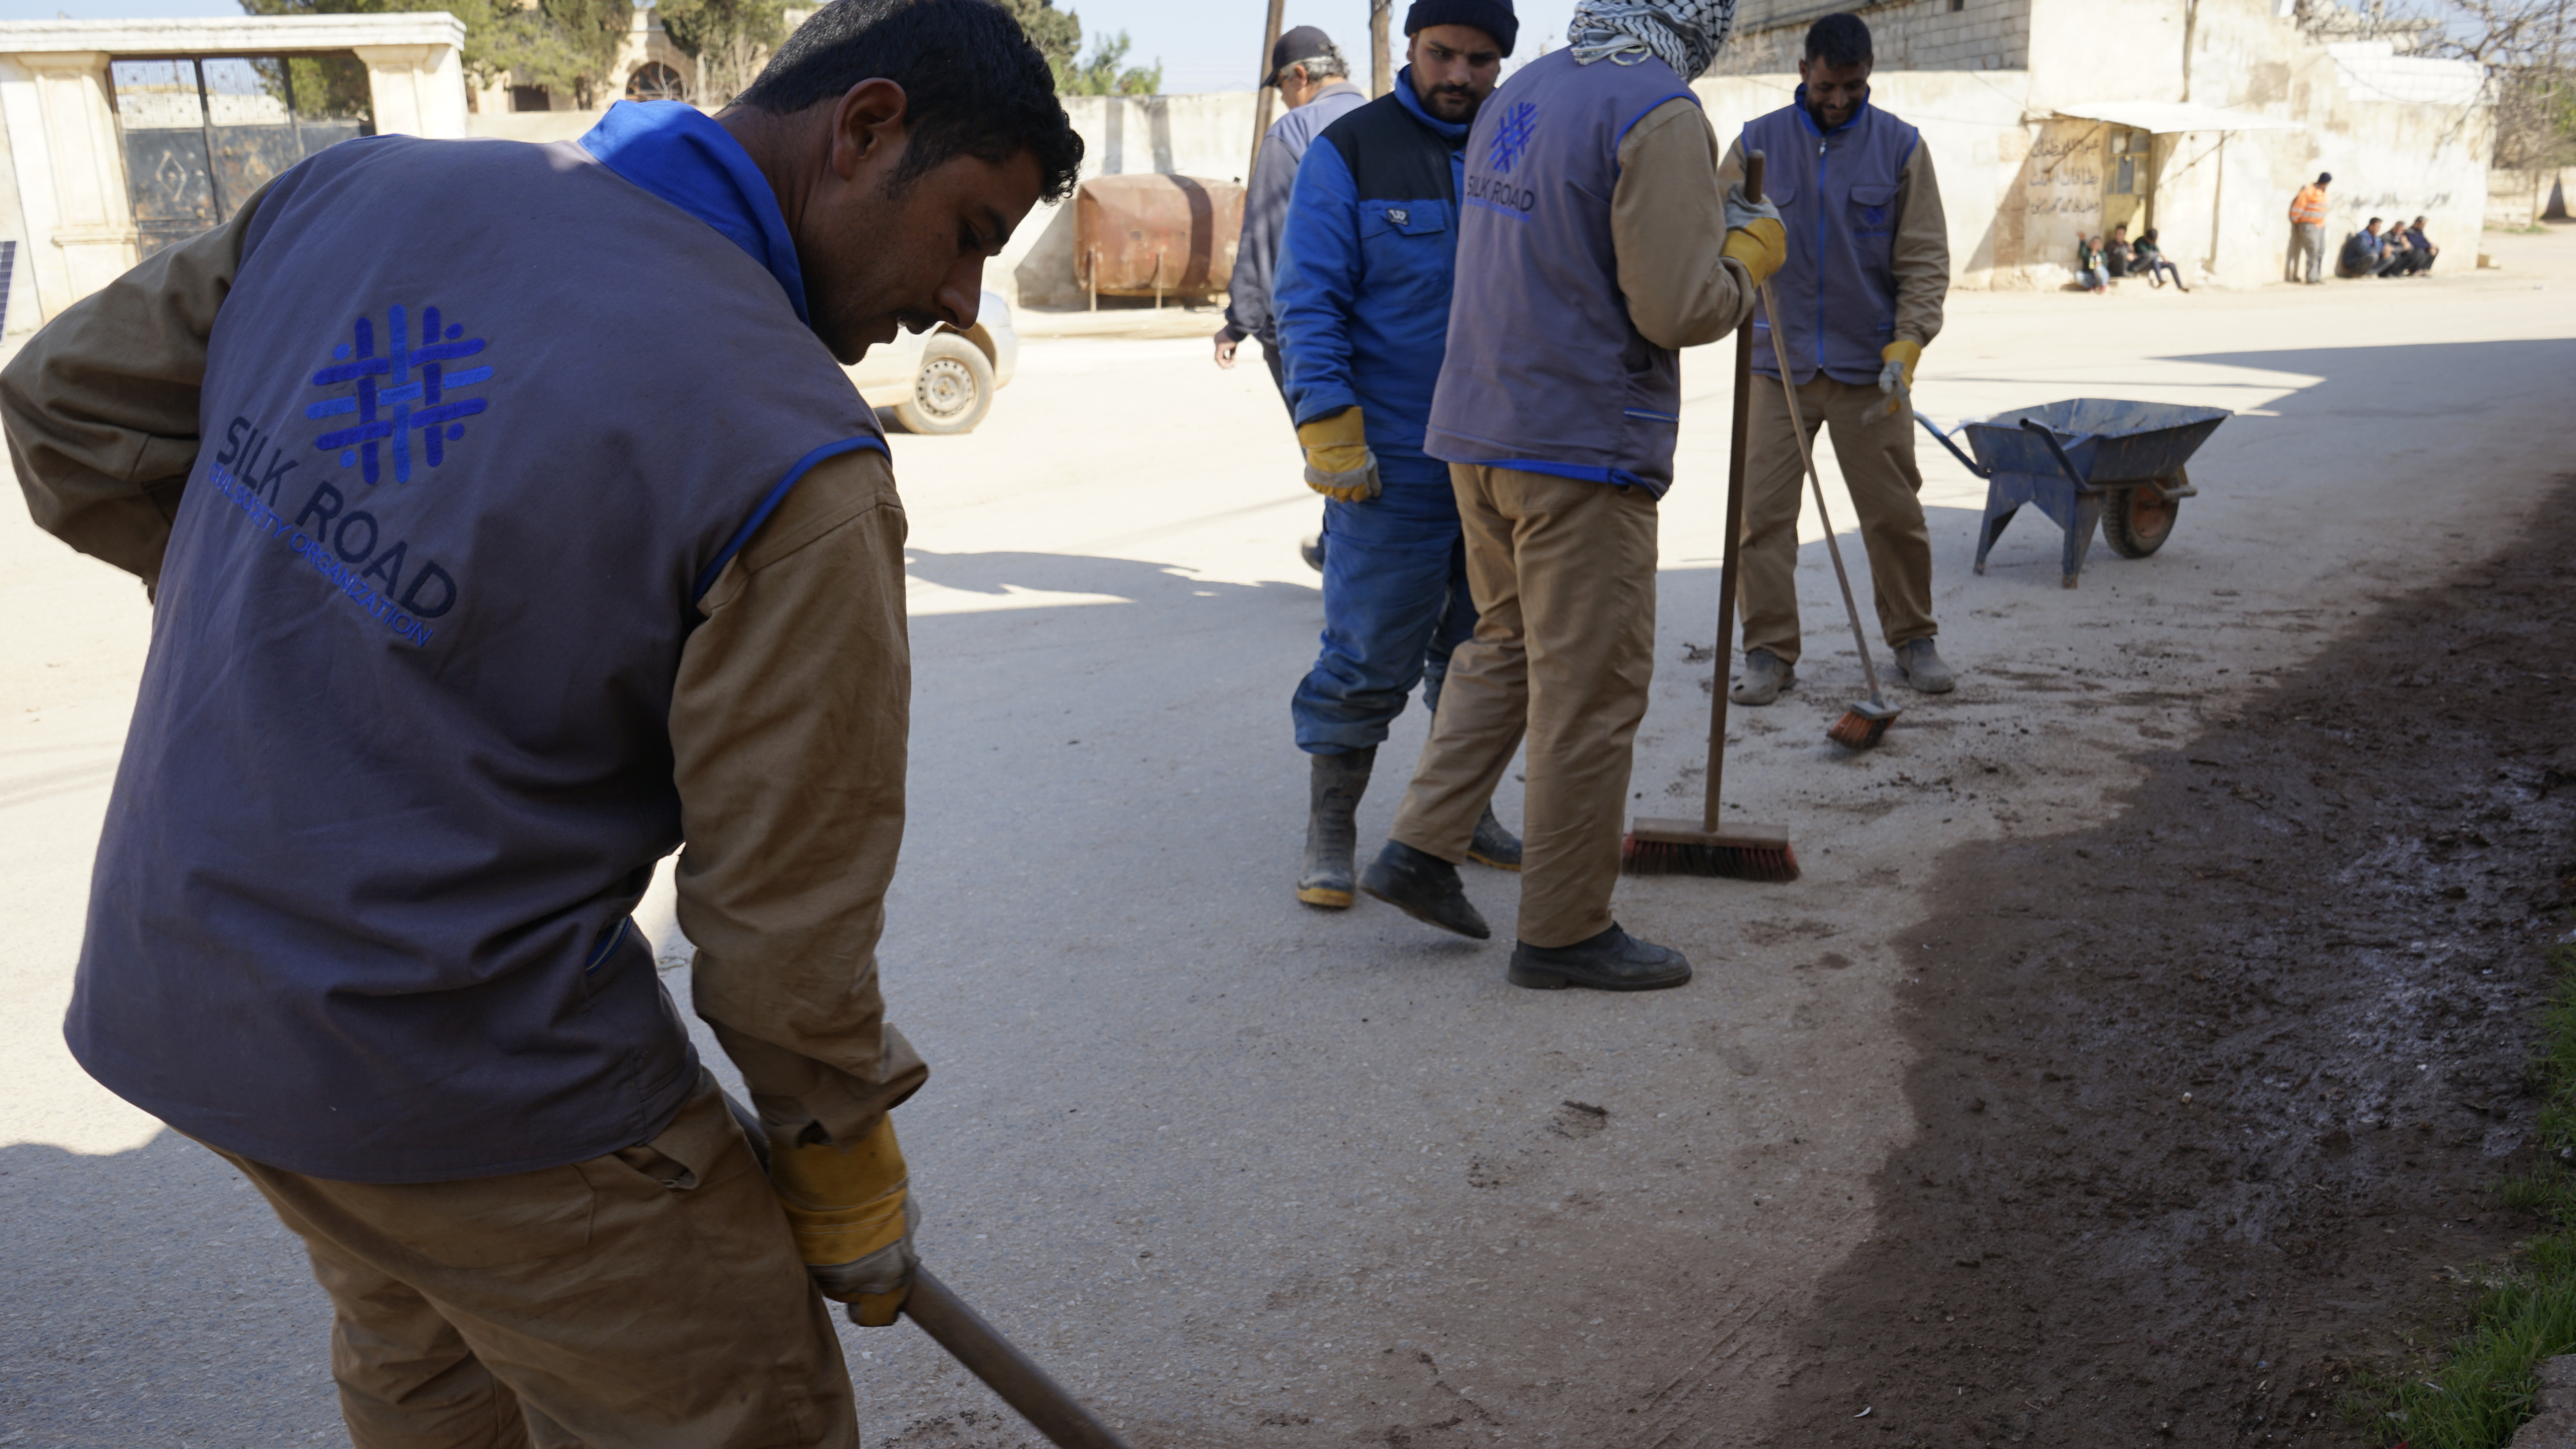 The cleaning teams of the Silk Road Organization started their work by collecting solid waste